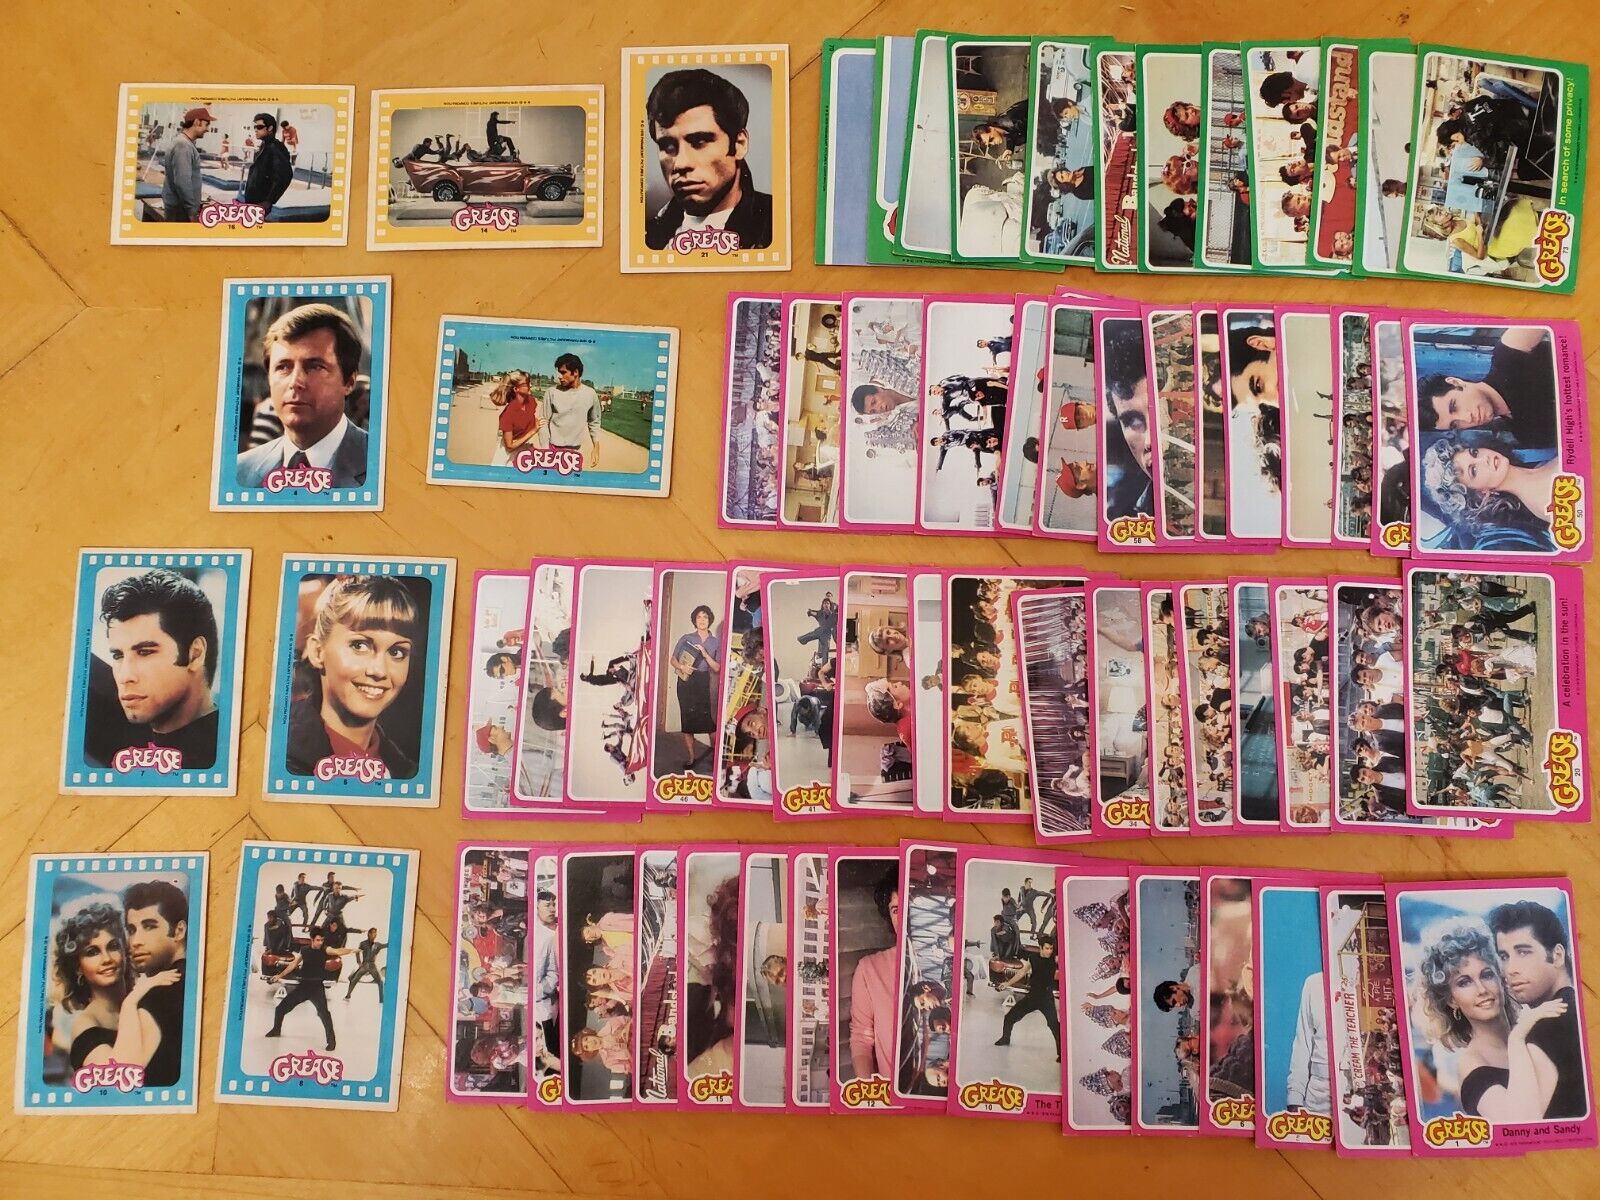 1978 Topps Grease Trading Cards Vintage Lot